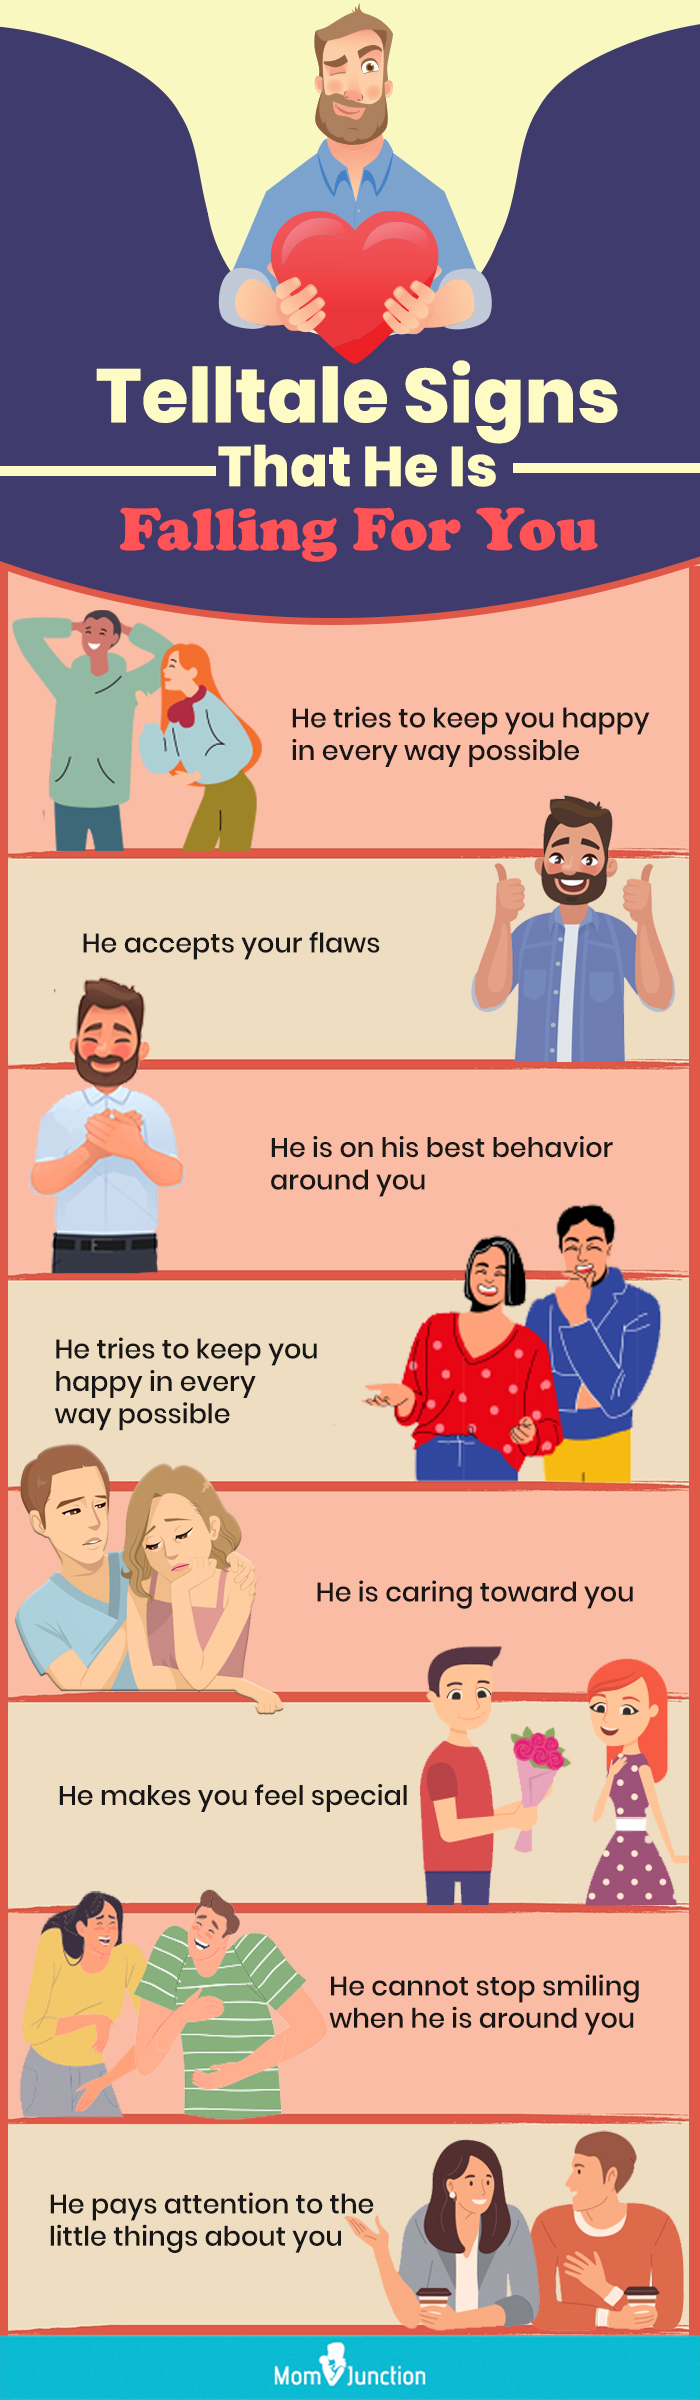 signs that he is falling in love with you [infographic]